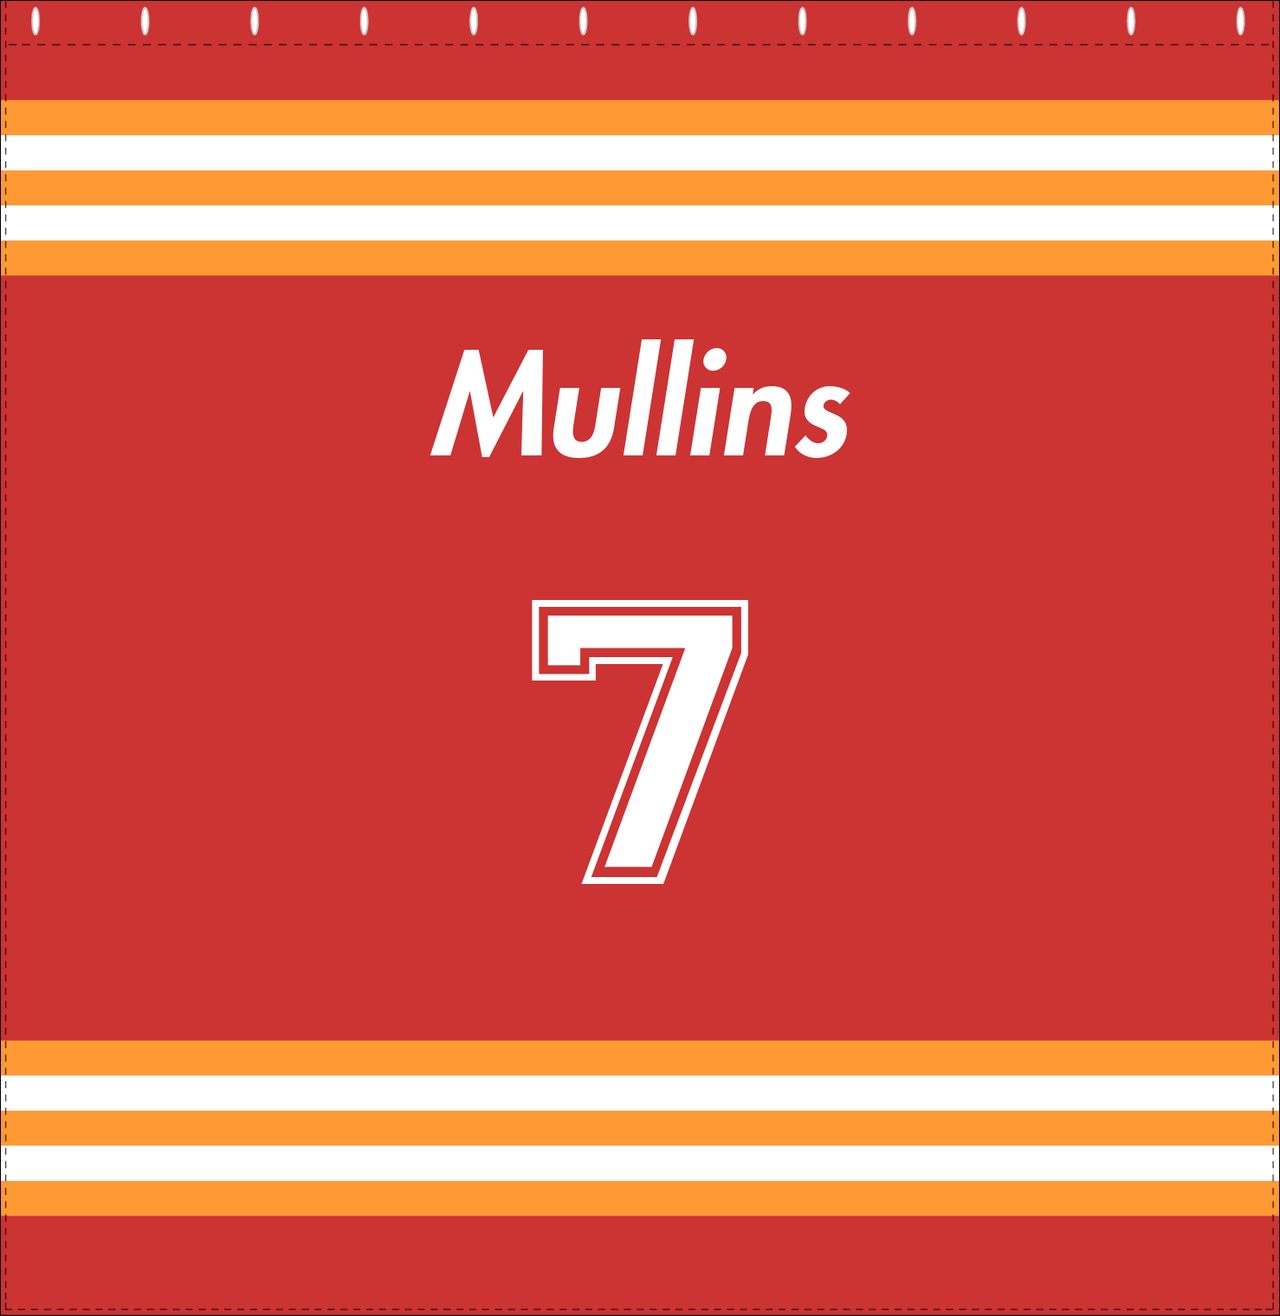 Personalized Jersey Number Shower Curtain - Red & Orange - Double Stripe - Decorate View